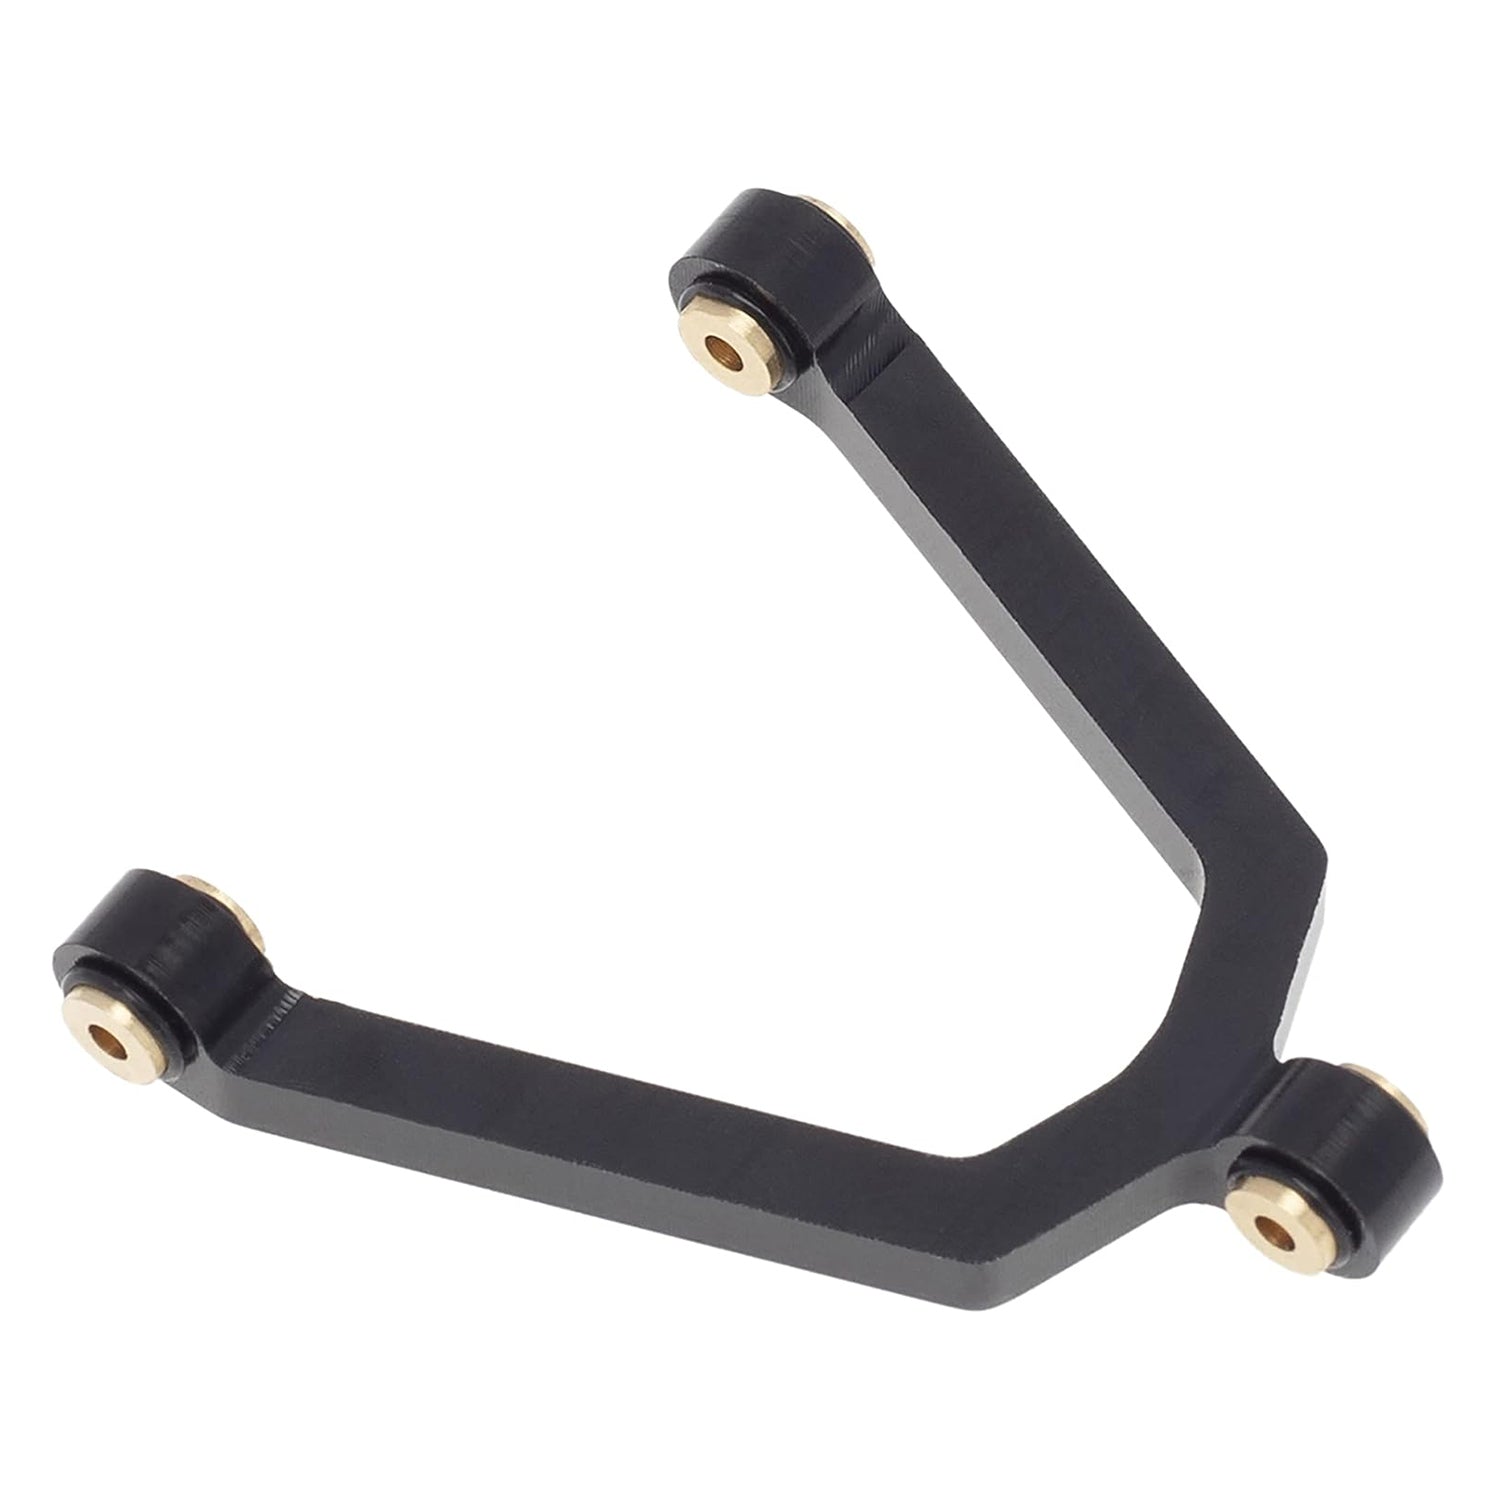 Black Aluminum Alloy Chassis Tie Rod and Steering Rod Kit for Axial SCX24